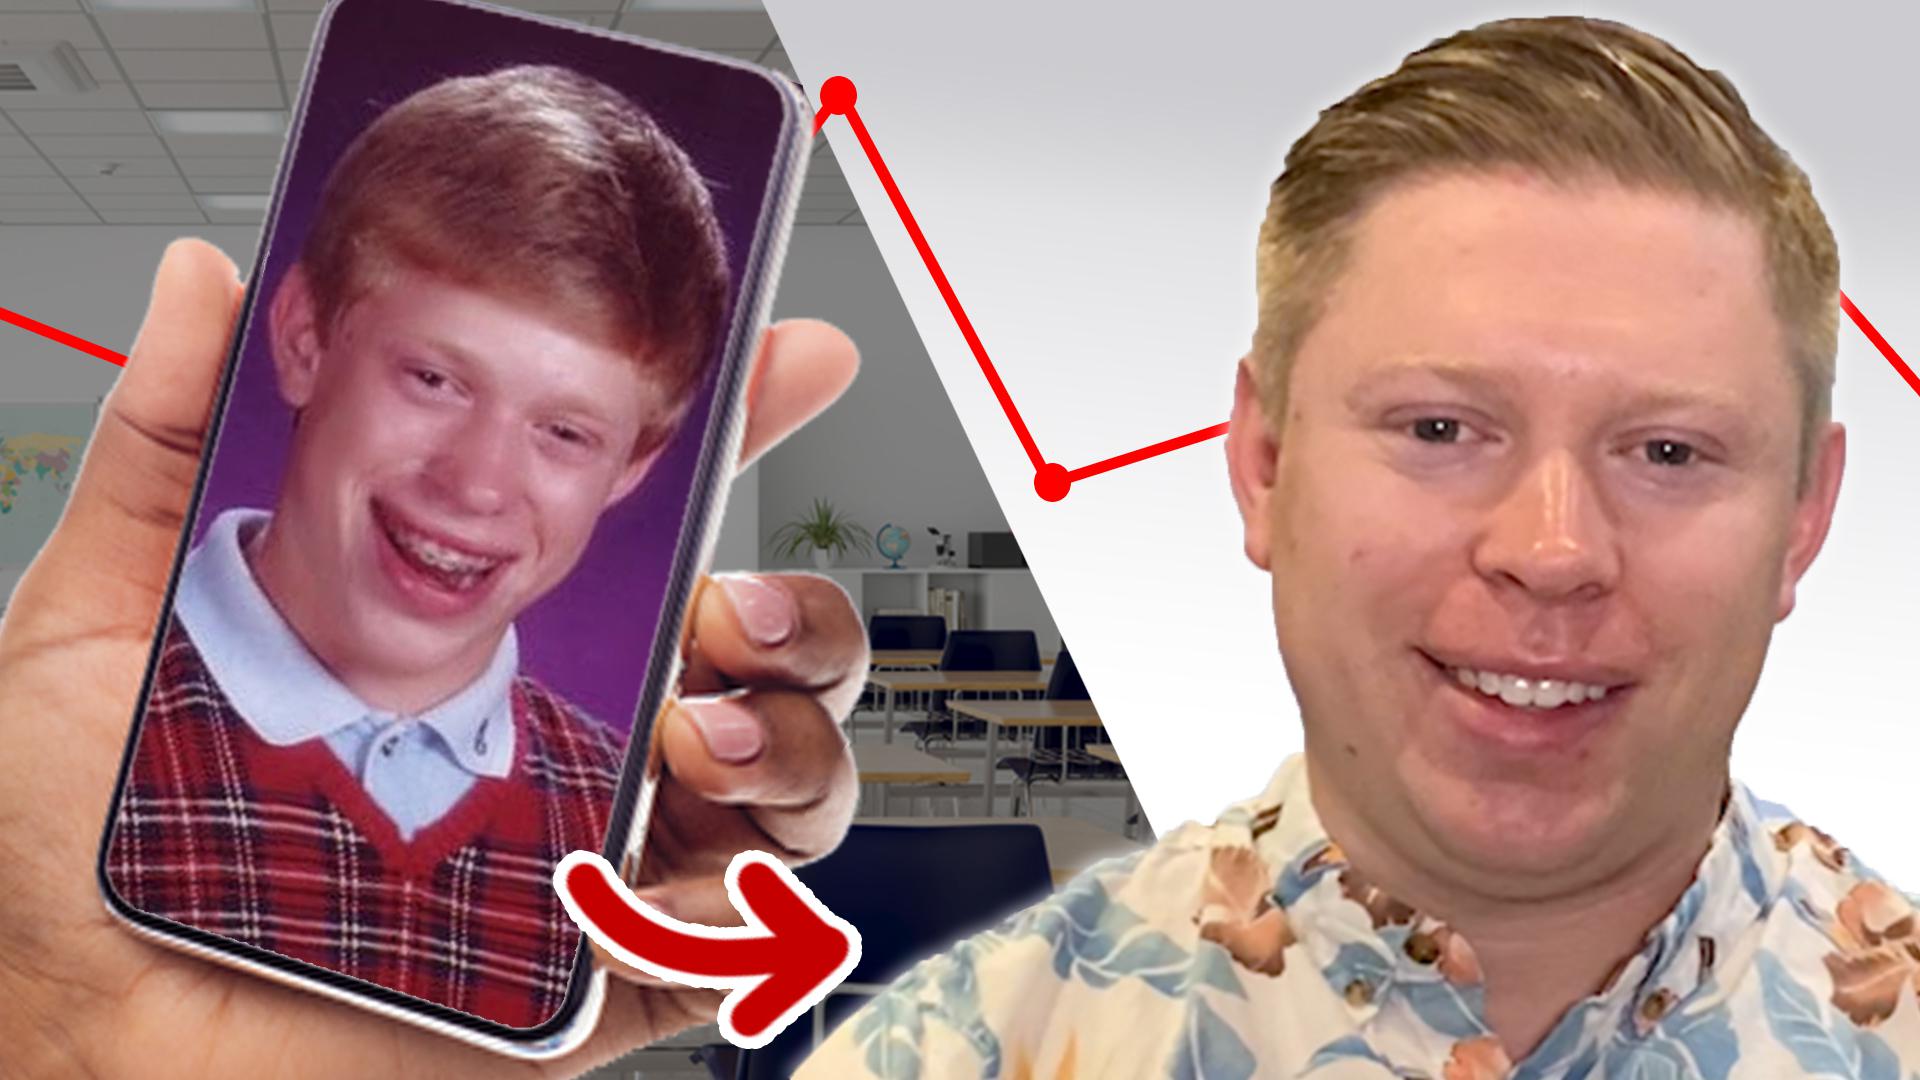 Watch: I Accidentally Became a Meme: Bad Luck Brian.